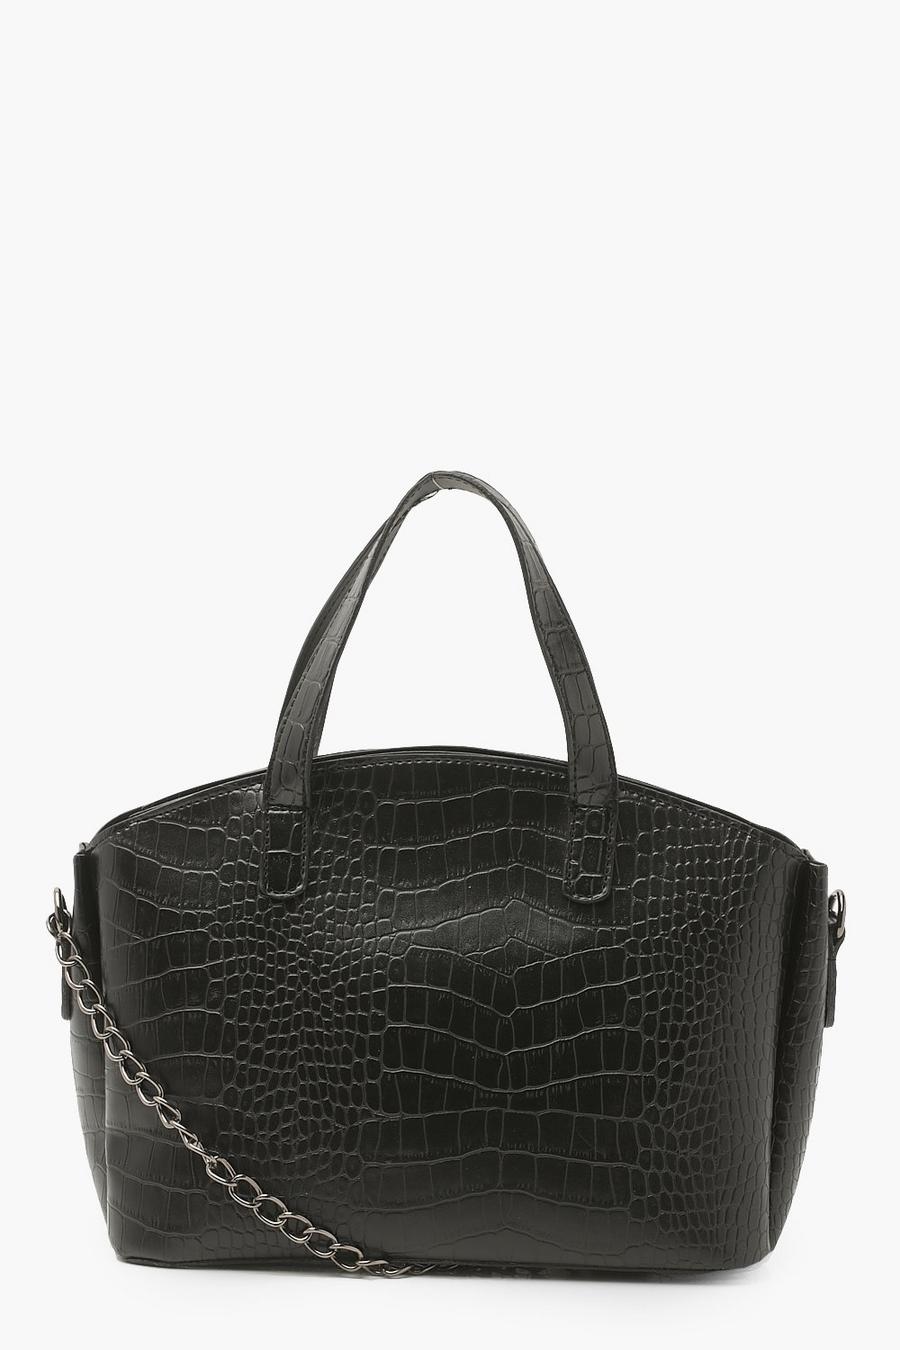 Black Croc Mini Tote Bag With Chain Strap image number 1